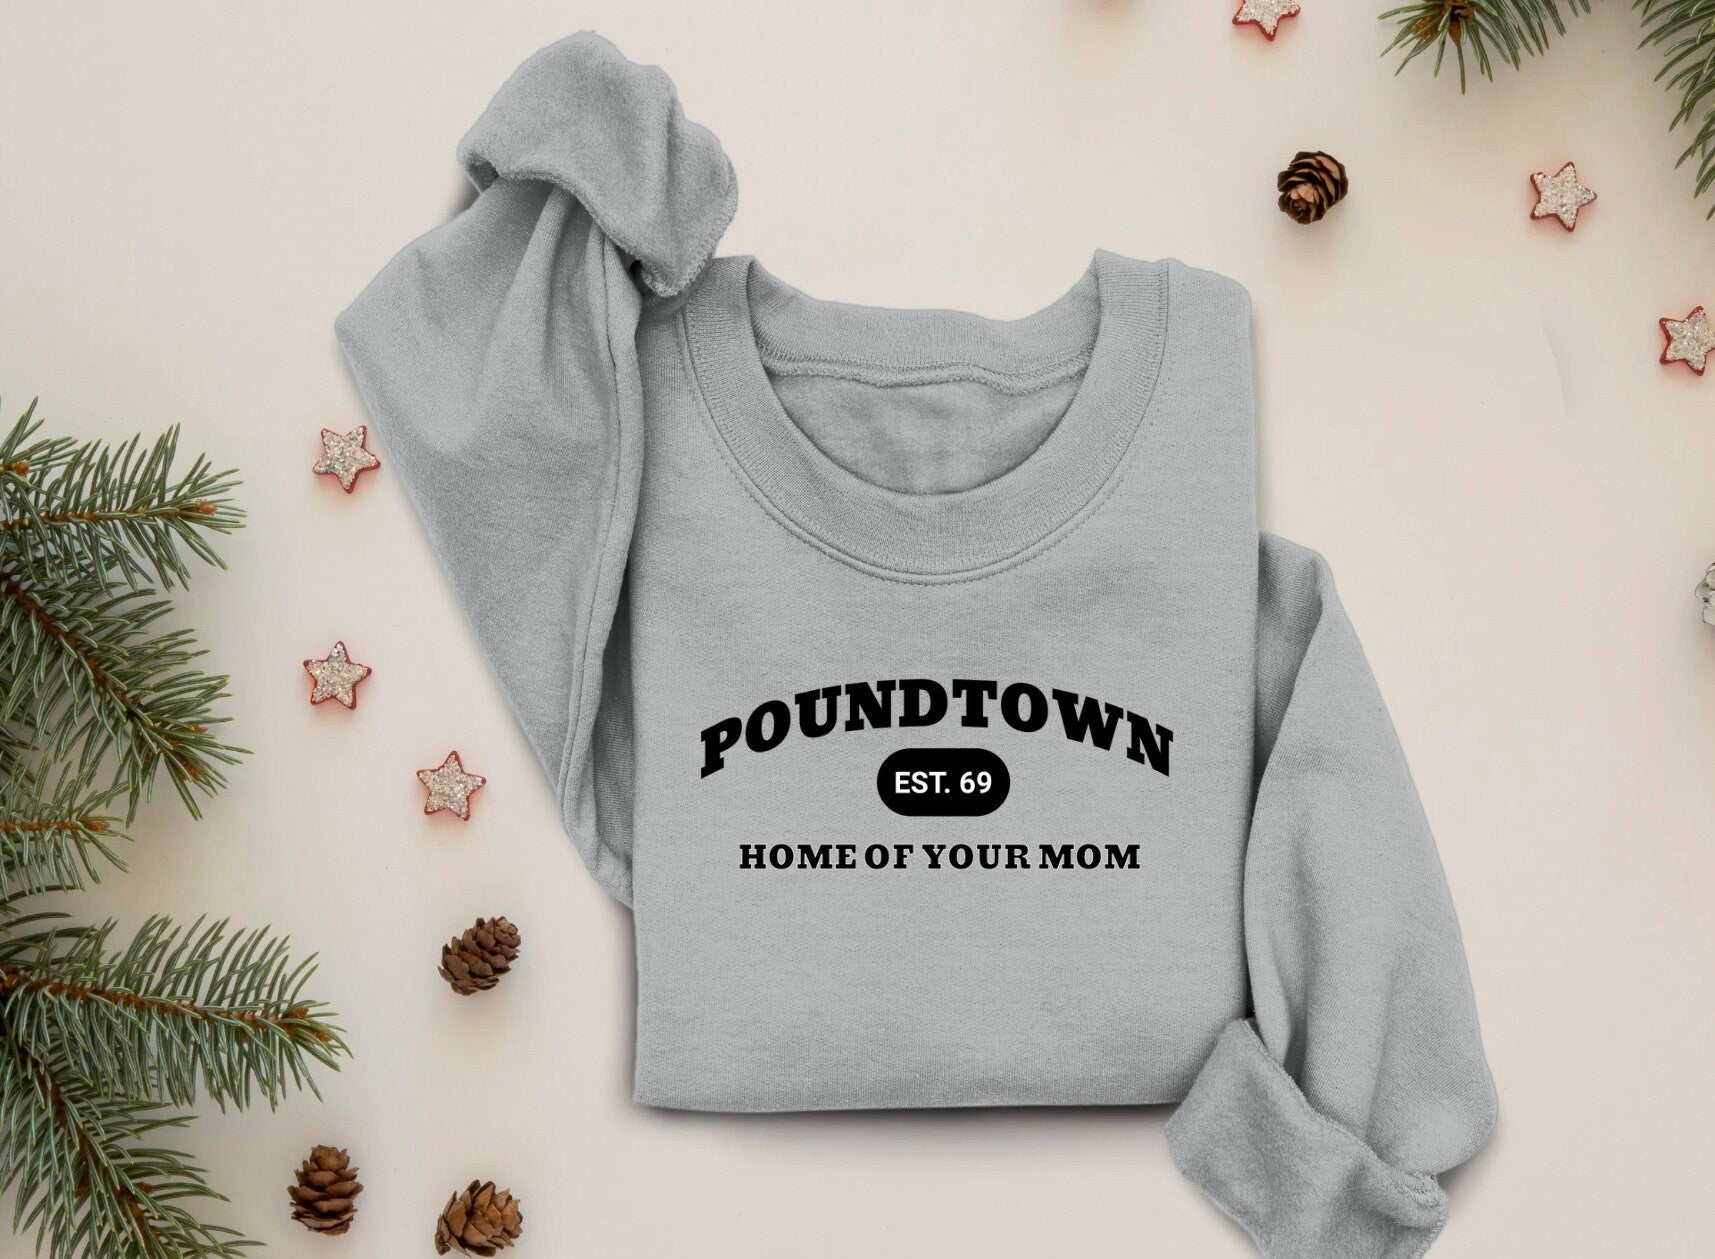 Pound town Sweatshirt, Poundtown Tee, Funny Crewneck, Crewneck Sweatshirt, Oversized Sweater, Comfy Sweater, Mothers Day Gift,Fall Sweater